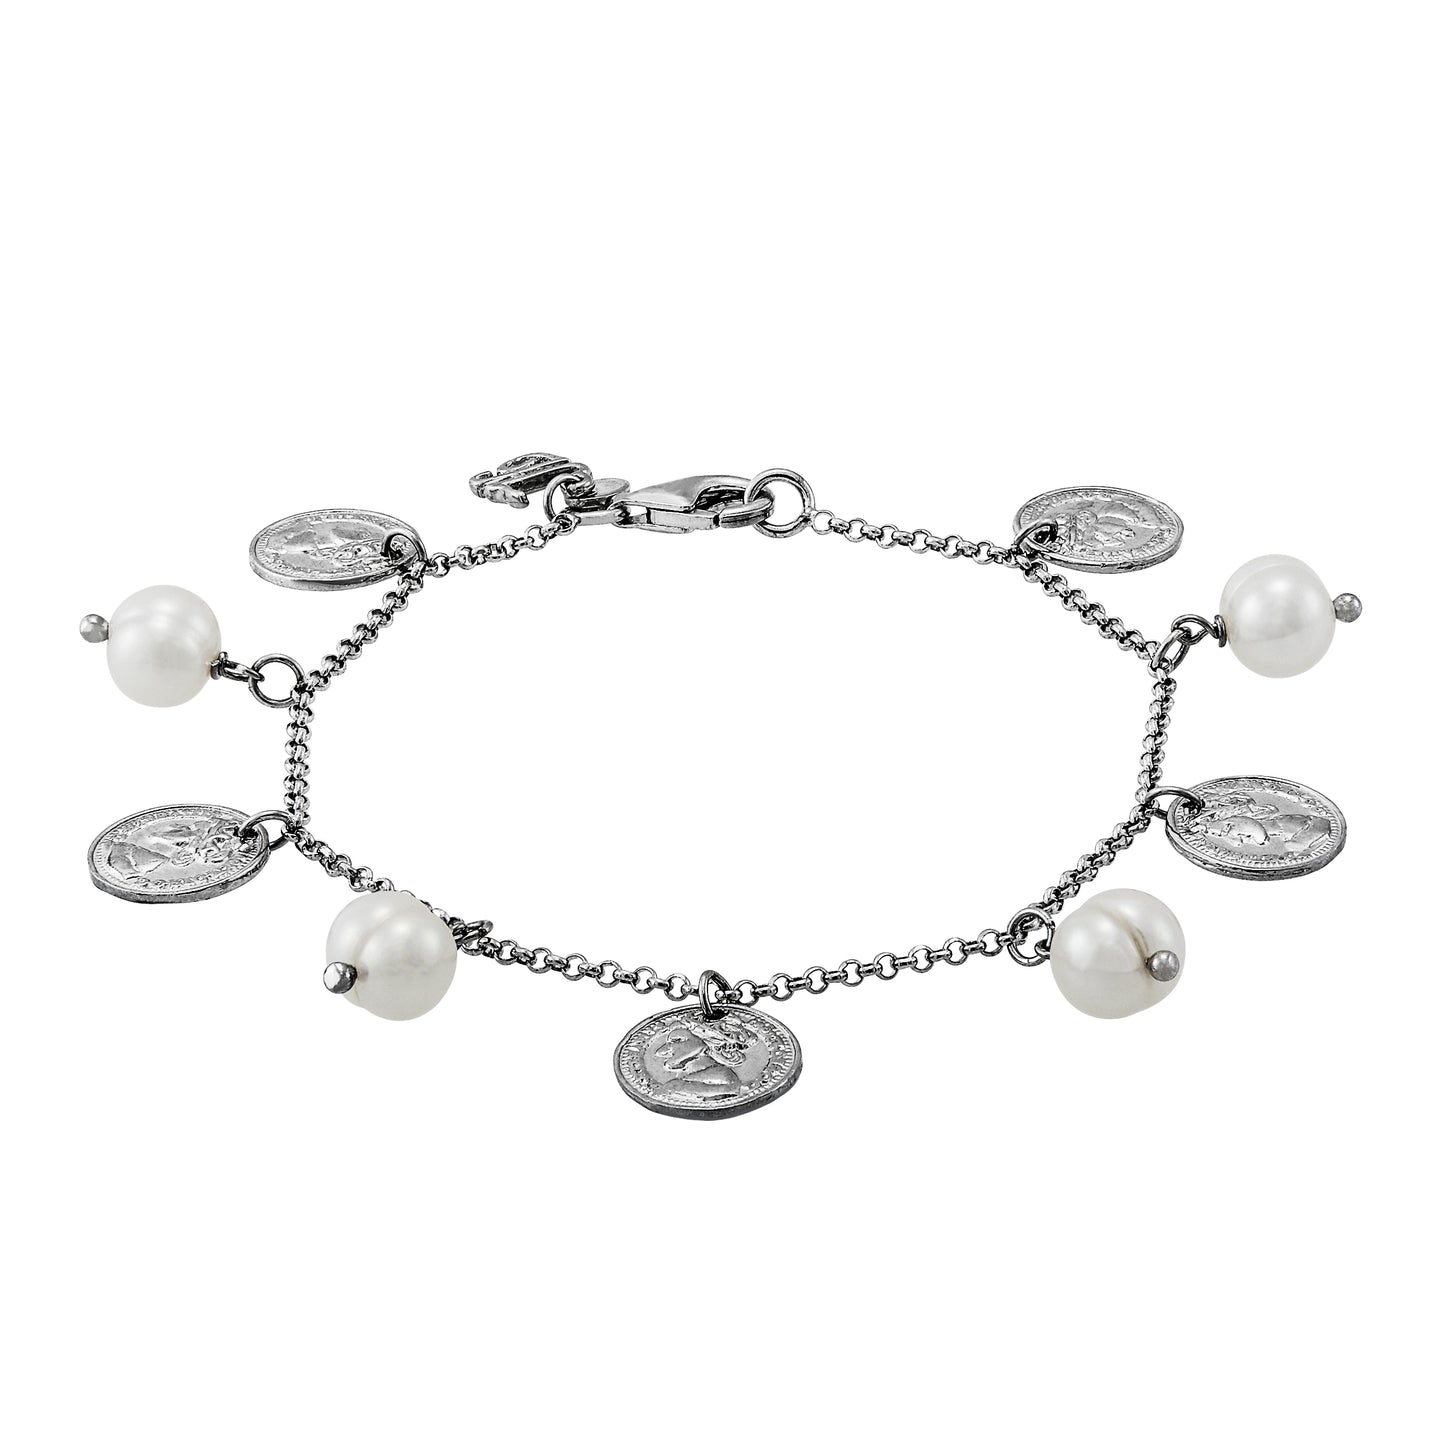 Honora Sterling Silver Bracelet Alternating Coins and Freshwater Pearls